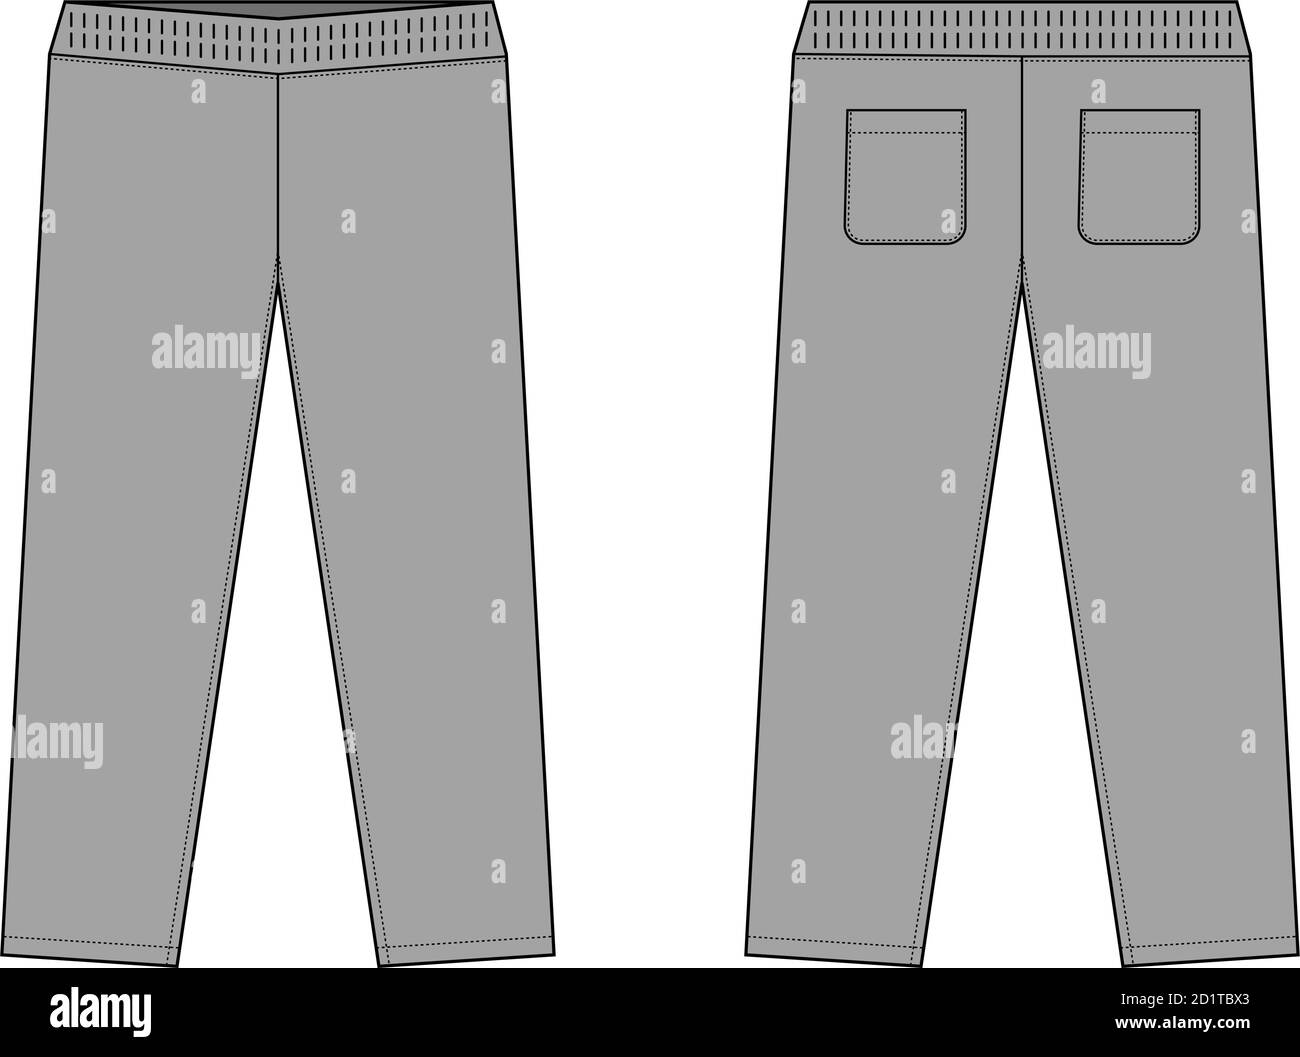 Casual jersey pants / sweat pants template vector illustration